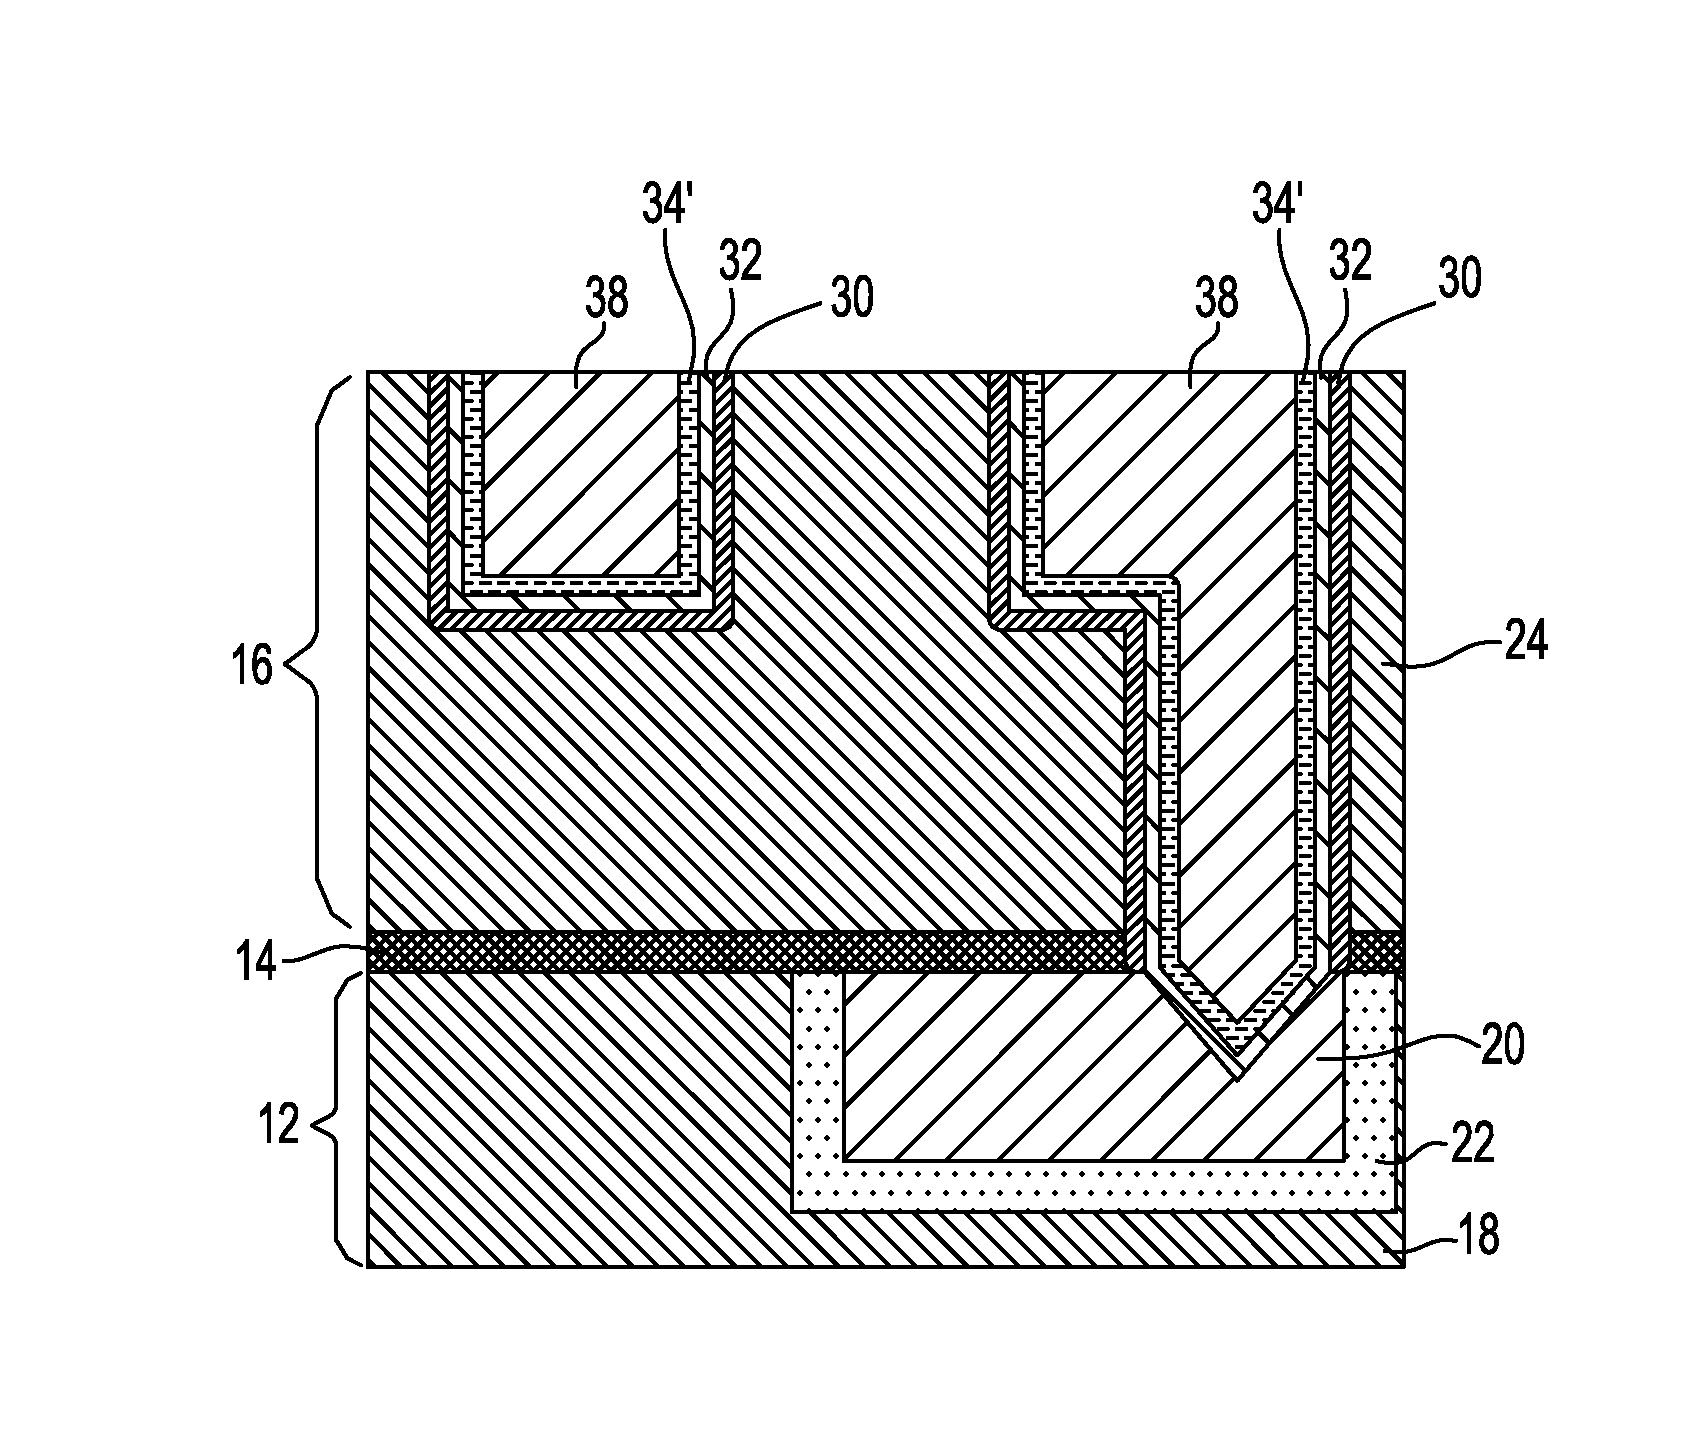 Large grain size conductive structure for narrow interconnect openings